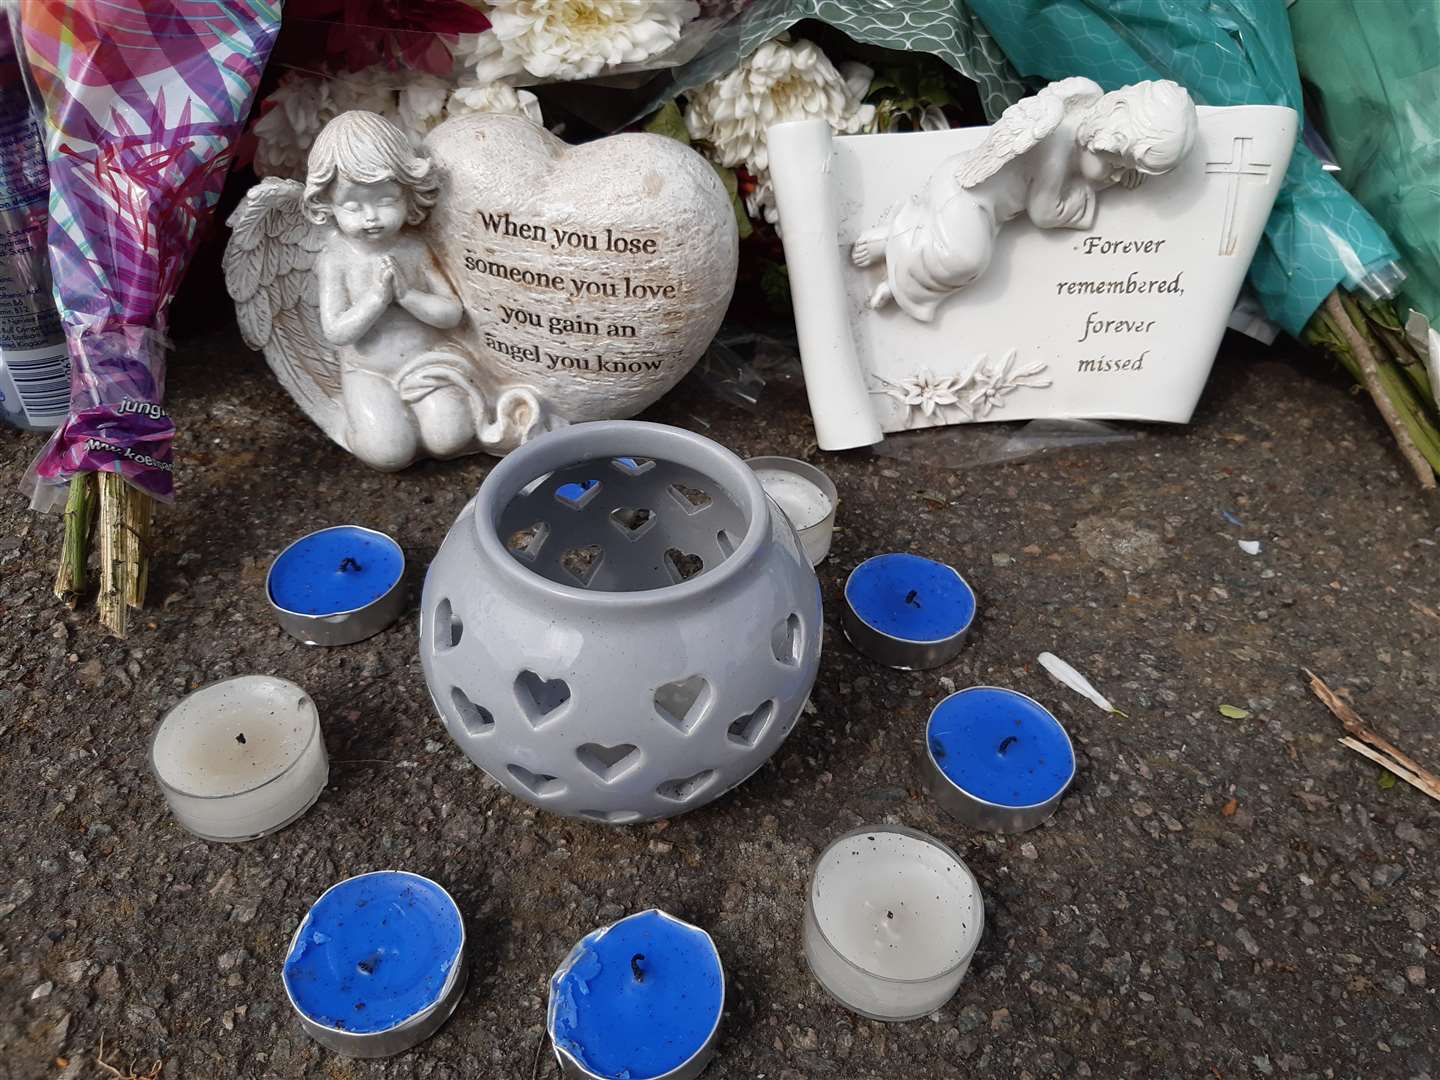 Candles left at the roadside in South Ashford